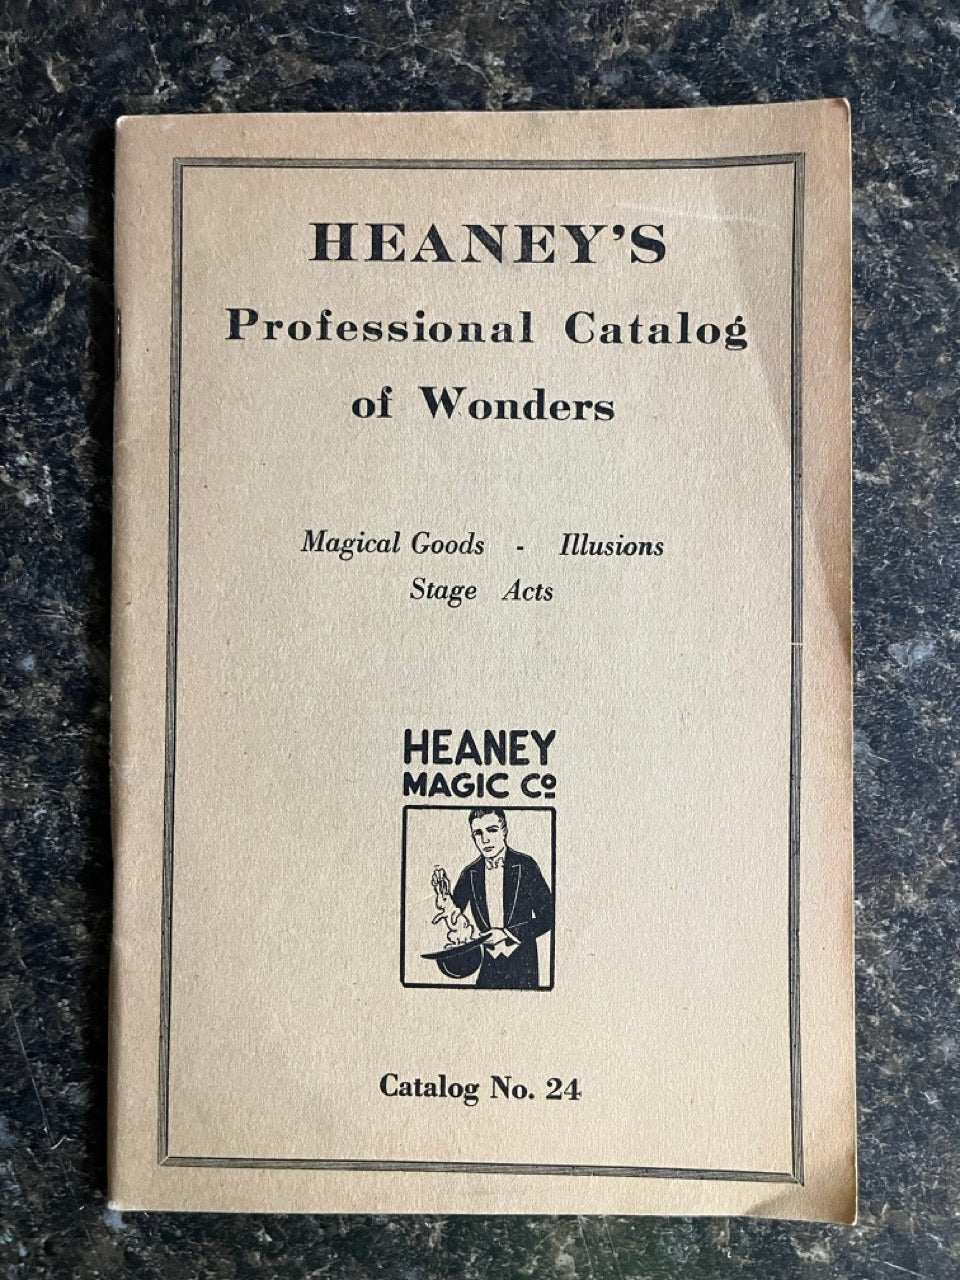 Heaney's Professional Catalog of Wonders #24